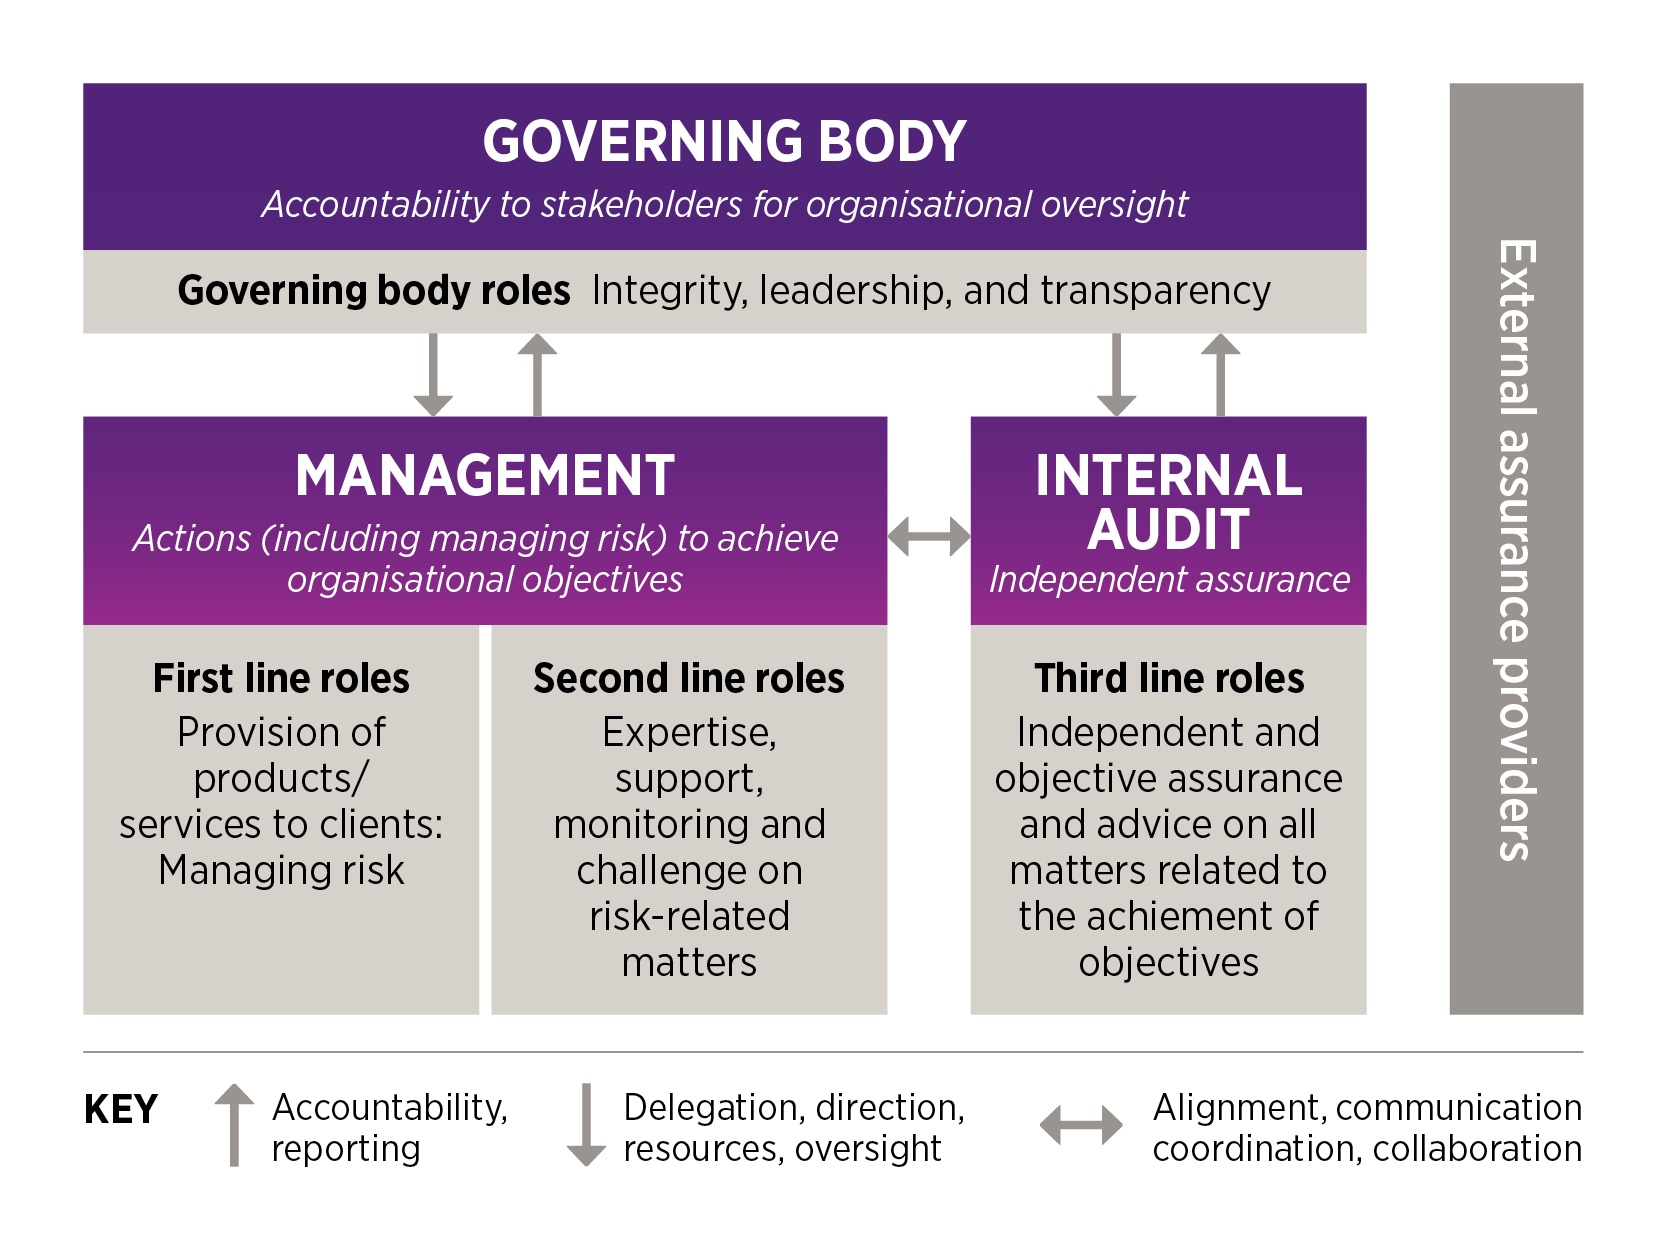 An image depicting the roles and responsibilities of the participants in the internal audit process, including the Senate (governing body), UQ senior management, and the Internal Audit team.